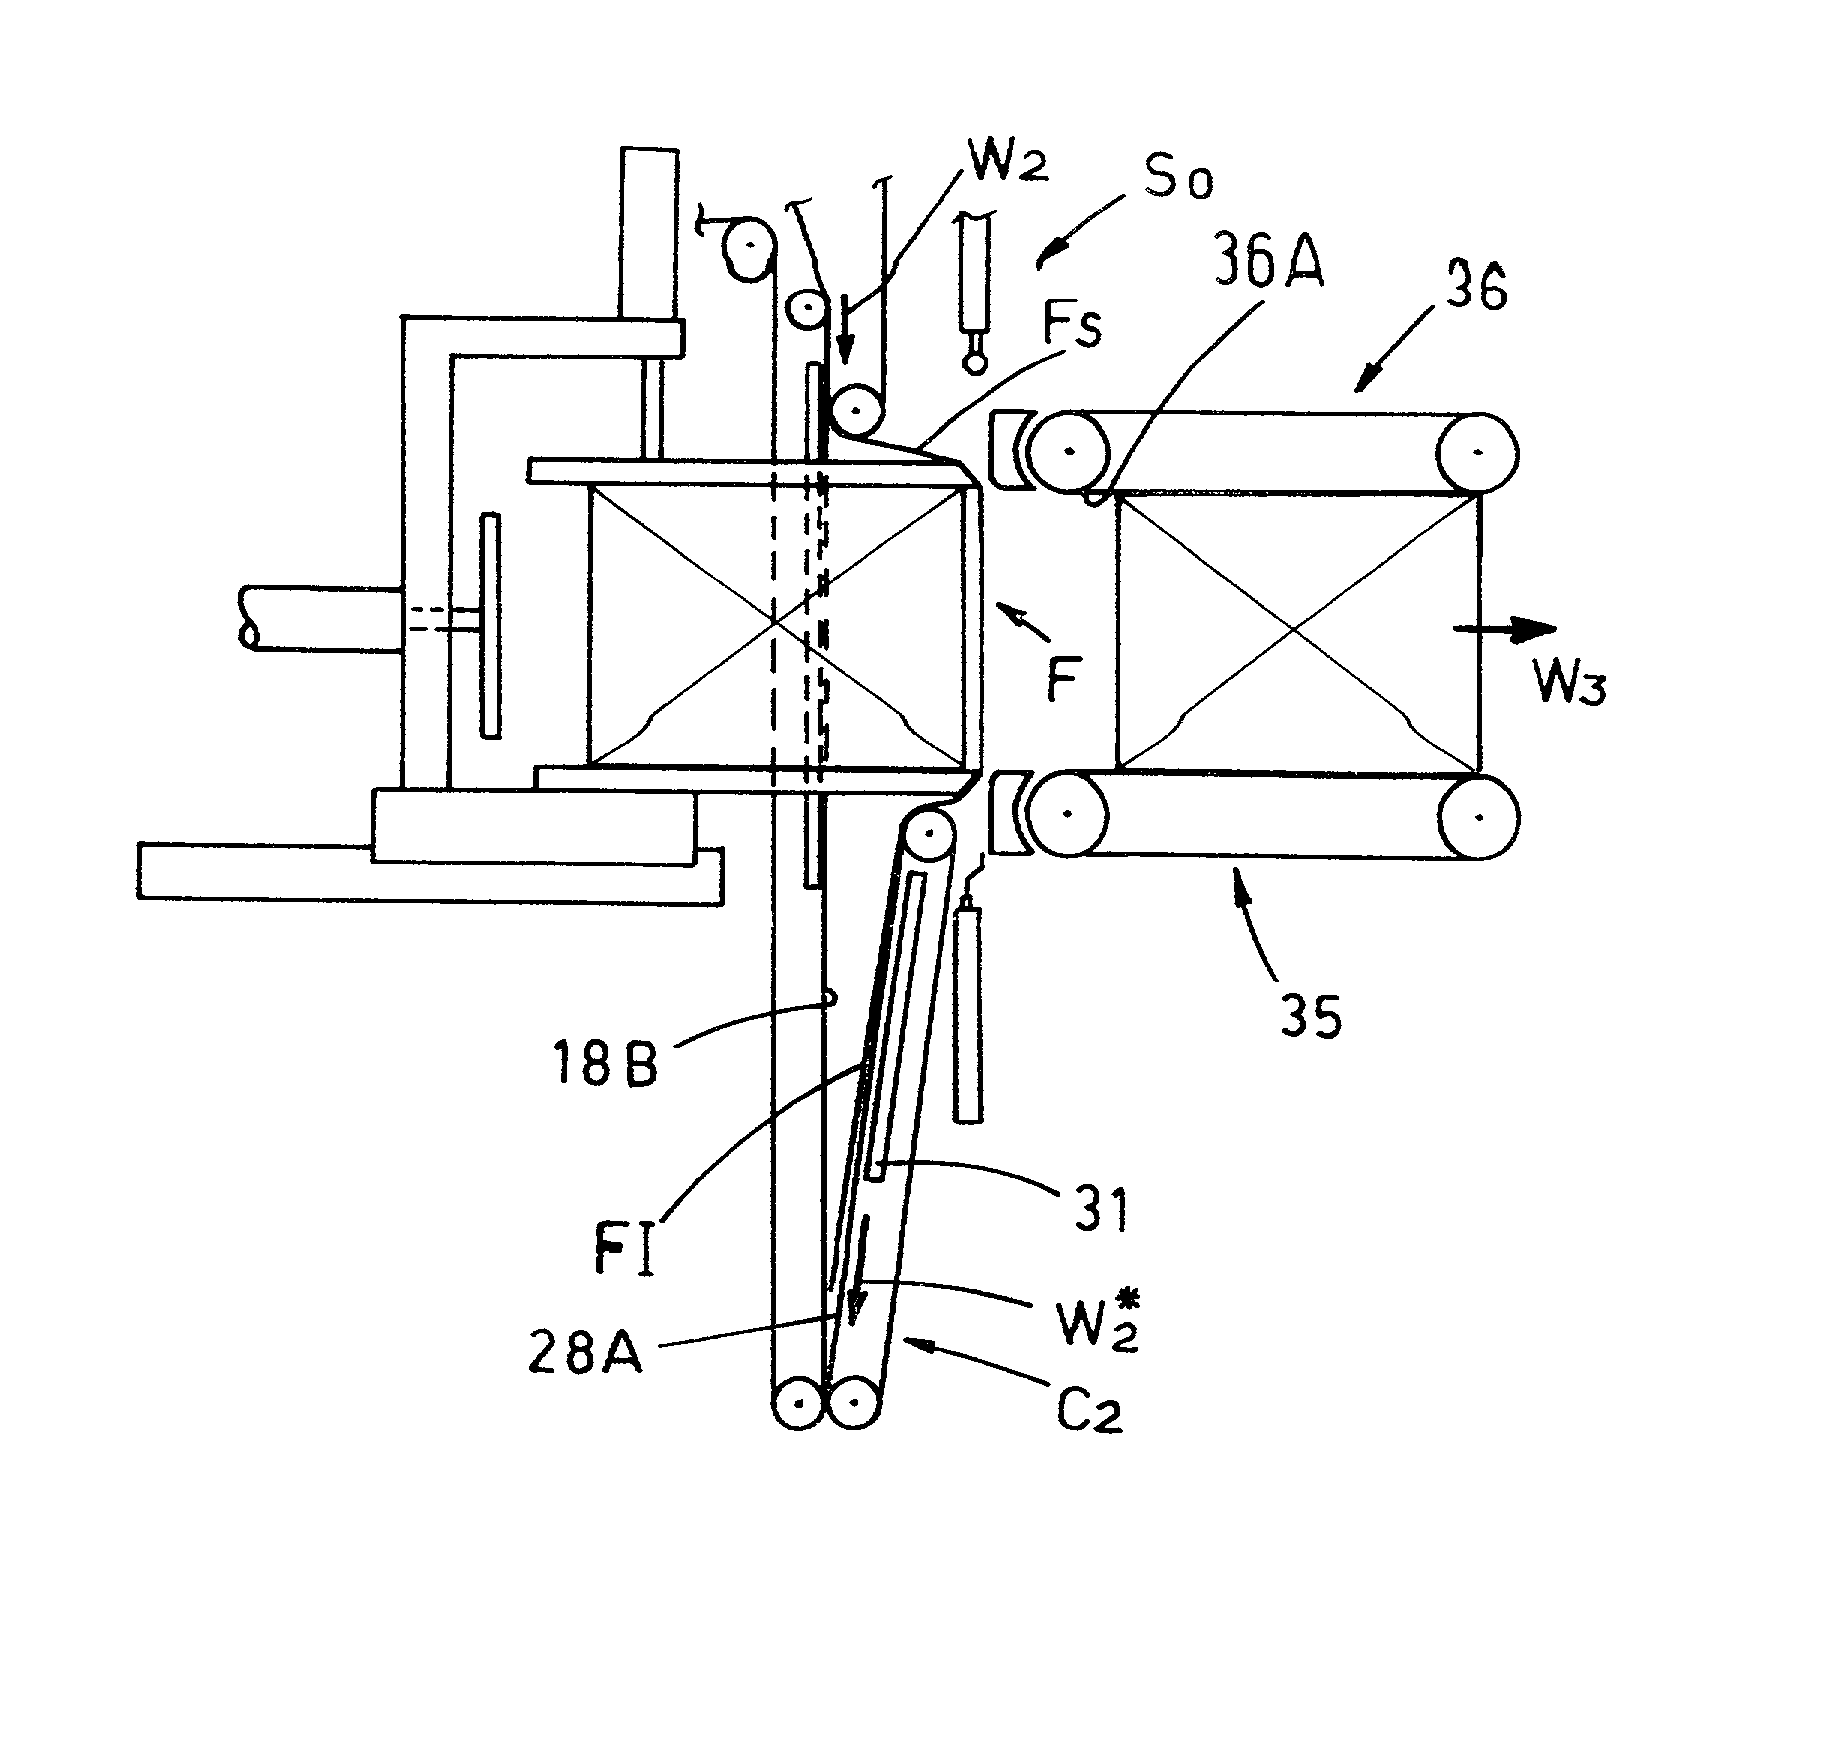 Machine for packaging stacks of multiply paper articles or the like into wrappings obtained from a wrapping sheet